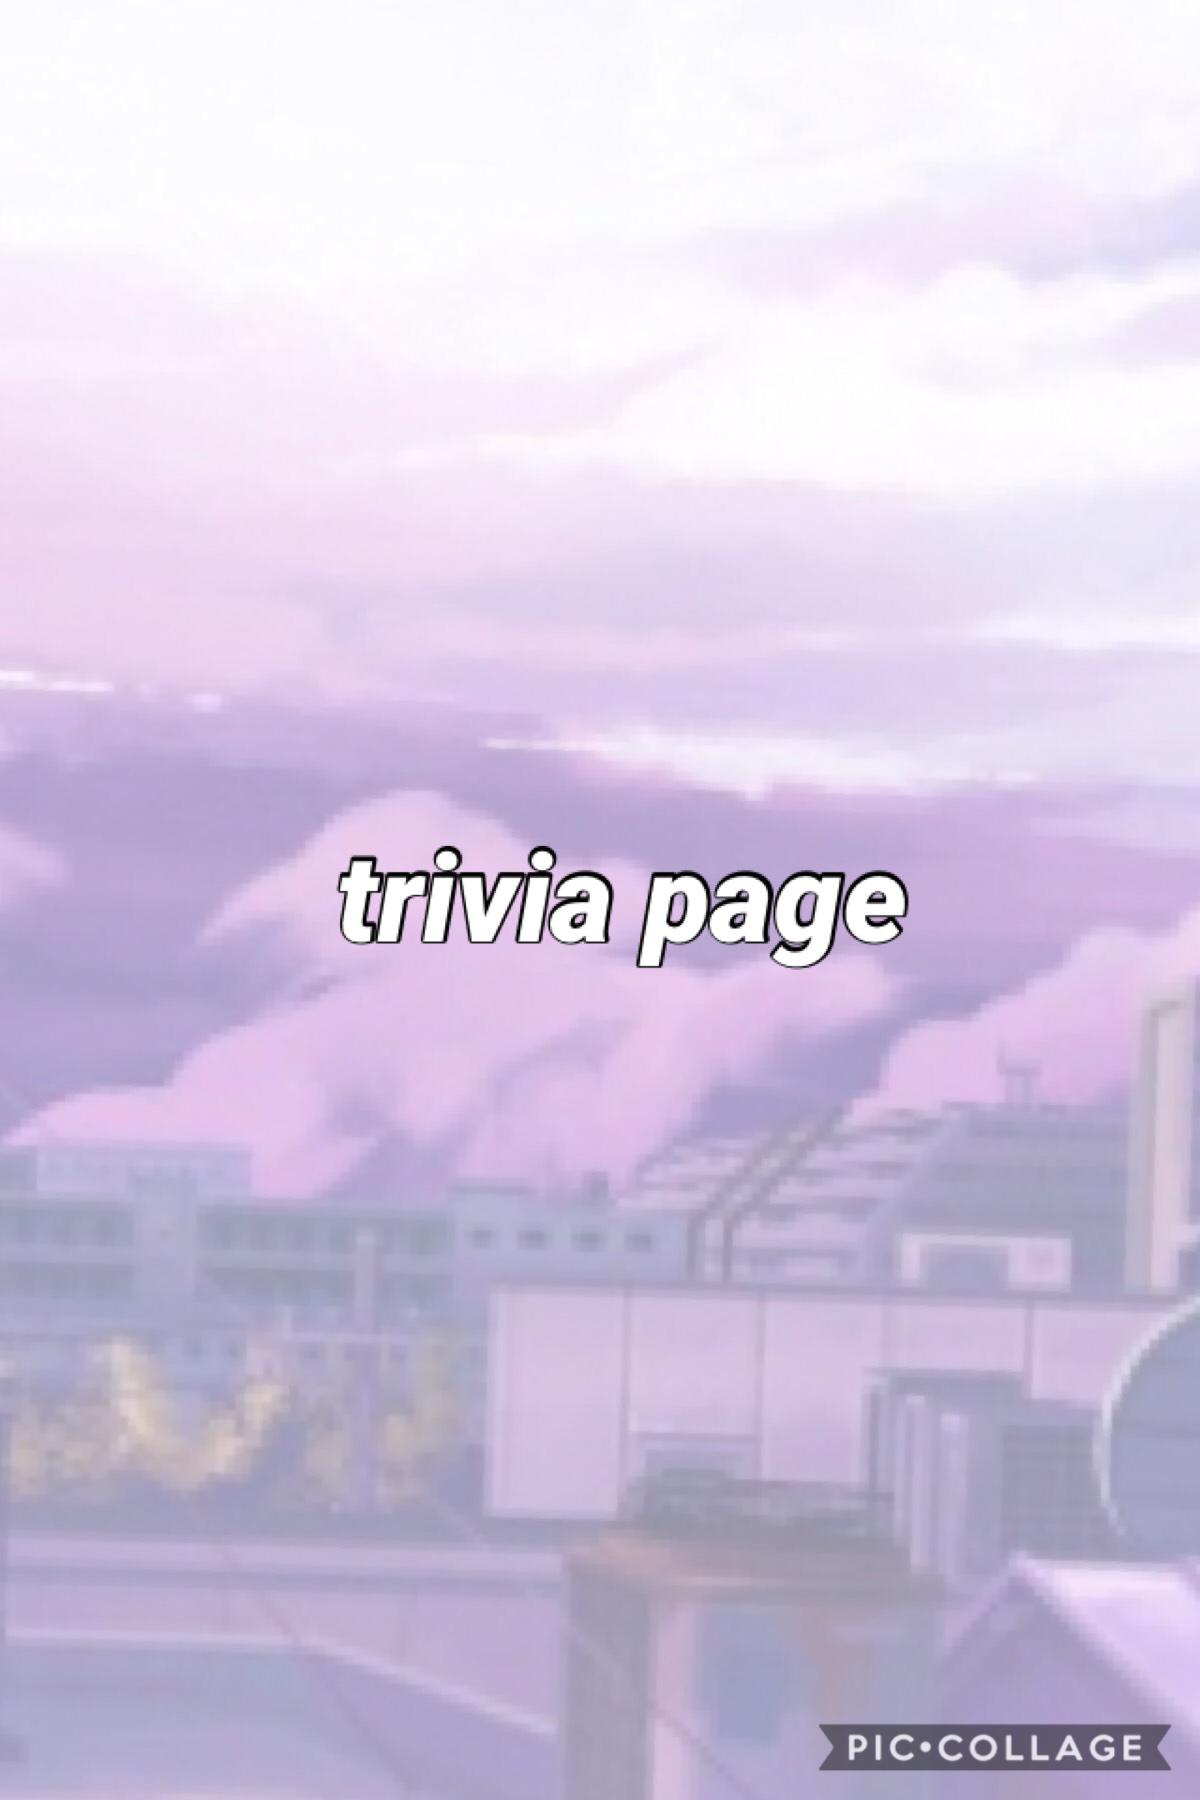 -reply- trivia games will be hosted by moderators often, check the comments for instructions on how to play!